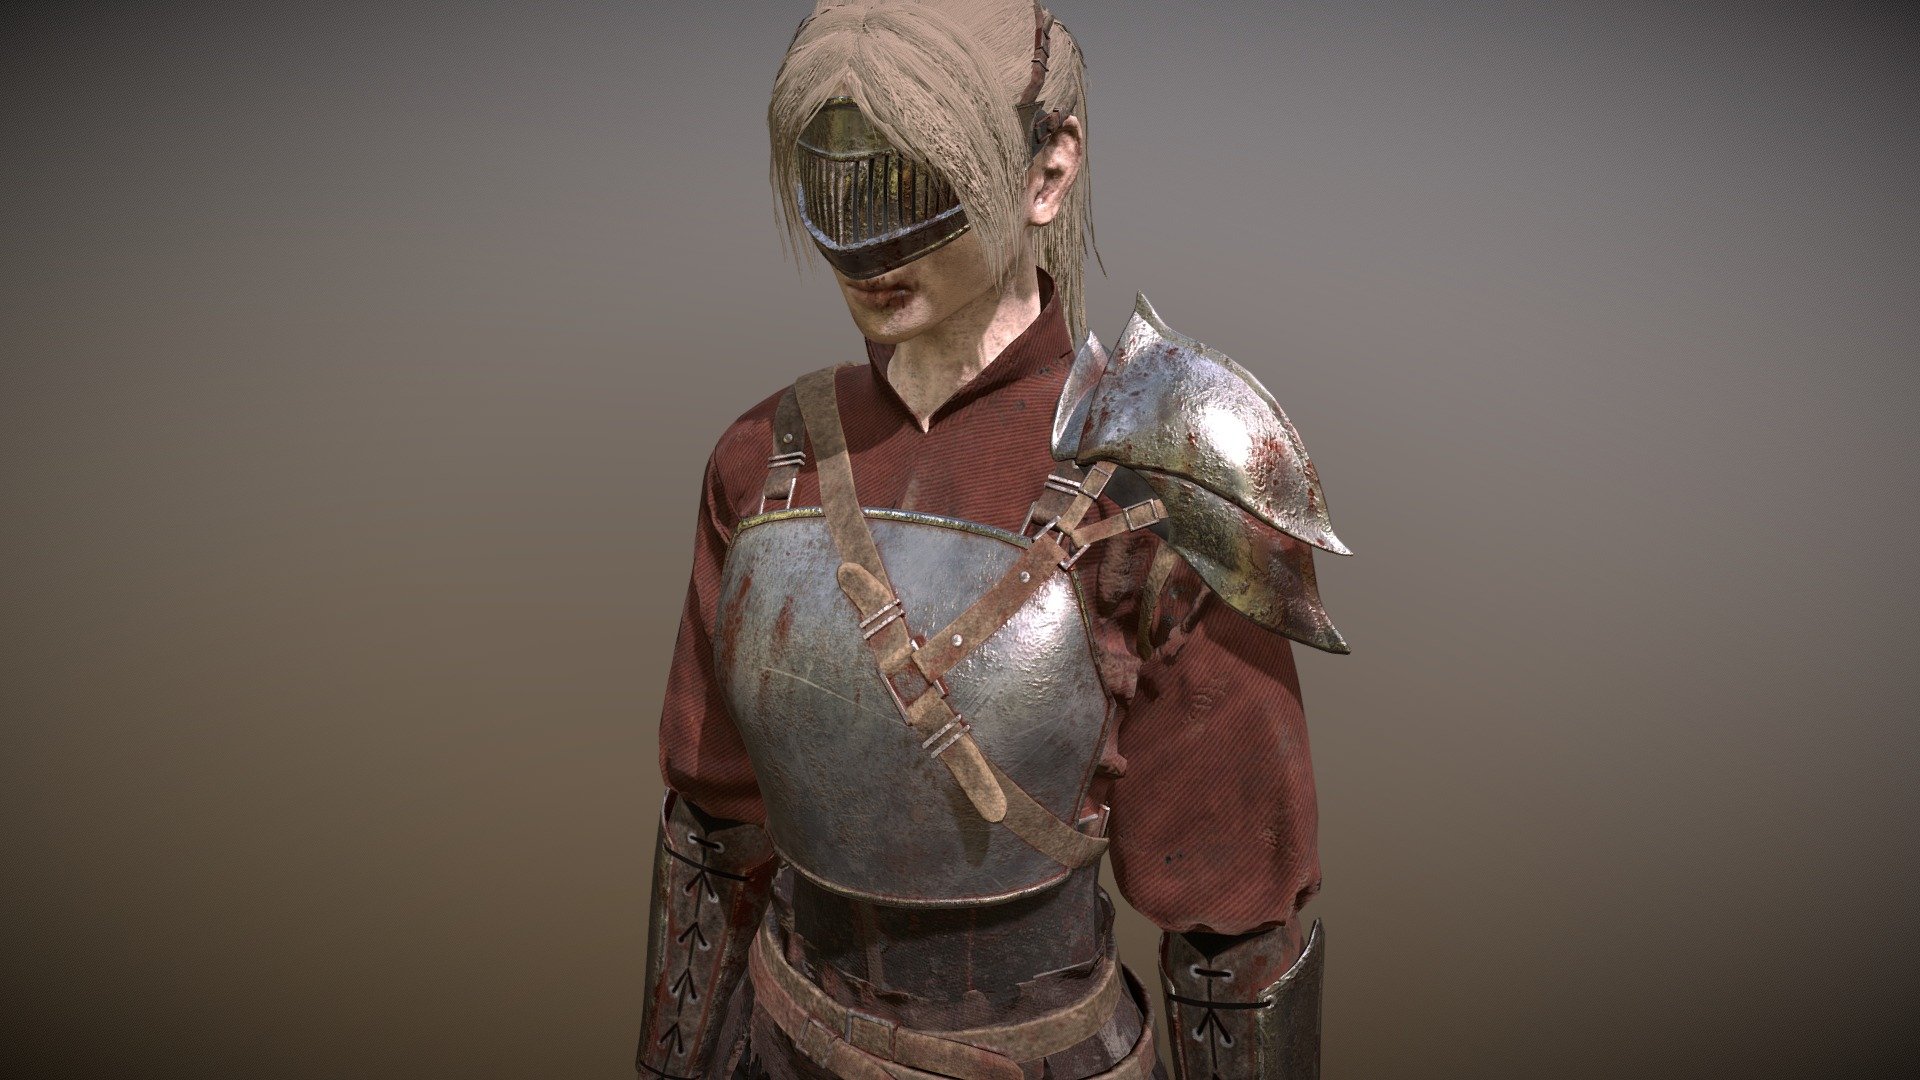 This character model was part of a game project for my final course this spring. This character was the main character in our game “Jeniah”, and she was the one the players played as. Our game project was very inspired by Souls-games like Dark Souls and a little bit of Bloodborne, and so I did my best to try and get the rigth “feeling” for the characters.

For this one I had a sketched concept art of the upper-half of the body made by one of my teammates, but I had to edit the shoulderpads to fit the game more, so the ones in this final model are edited. The rest I came up with on my own. I had four days to make this character as well.

Base body modeled in Zbrush. Cloth in Marvelous Designer, armour, hairplanes, and retopologization in Maya. Textured in Substance Painter. For the hairplanes, I rendered the textures from creating hair clumps in XGen and then using XNormals to get the different textures 3d model